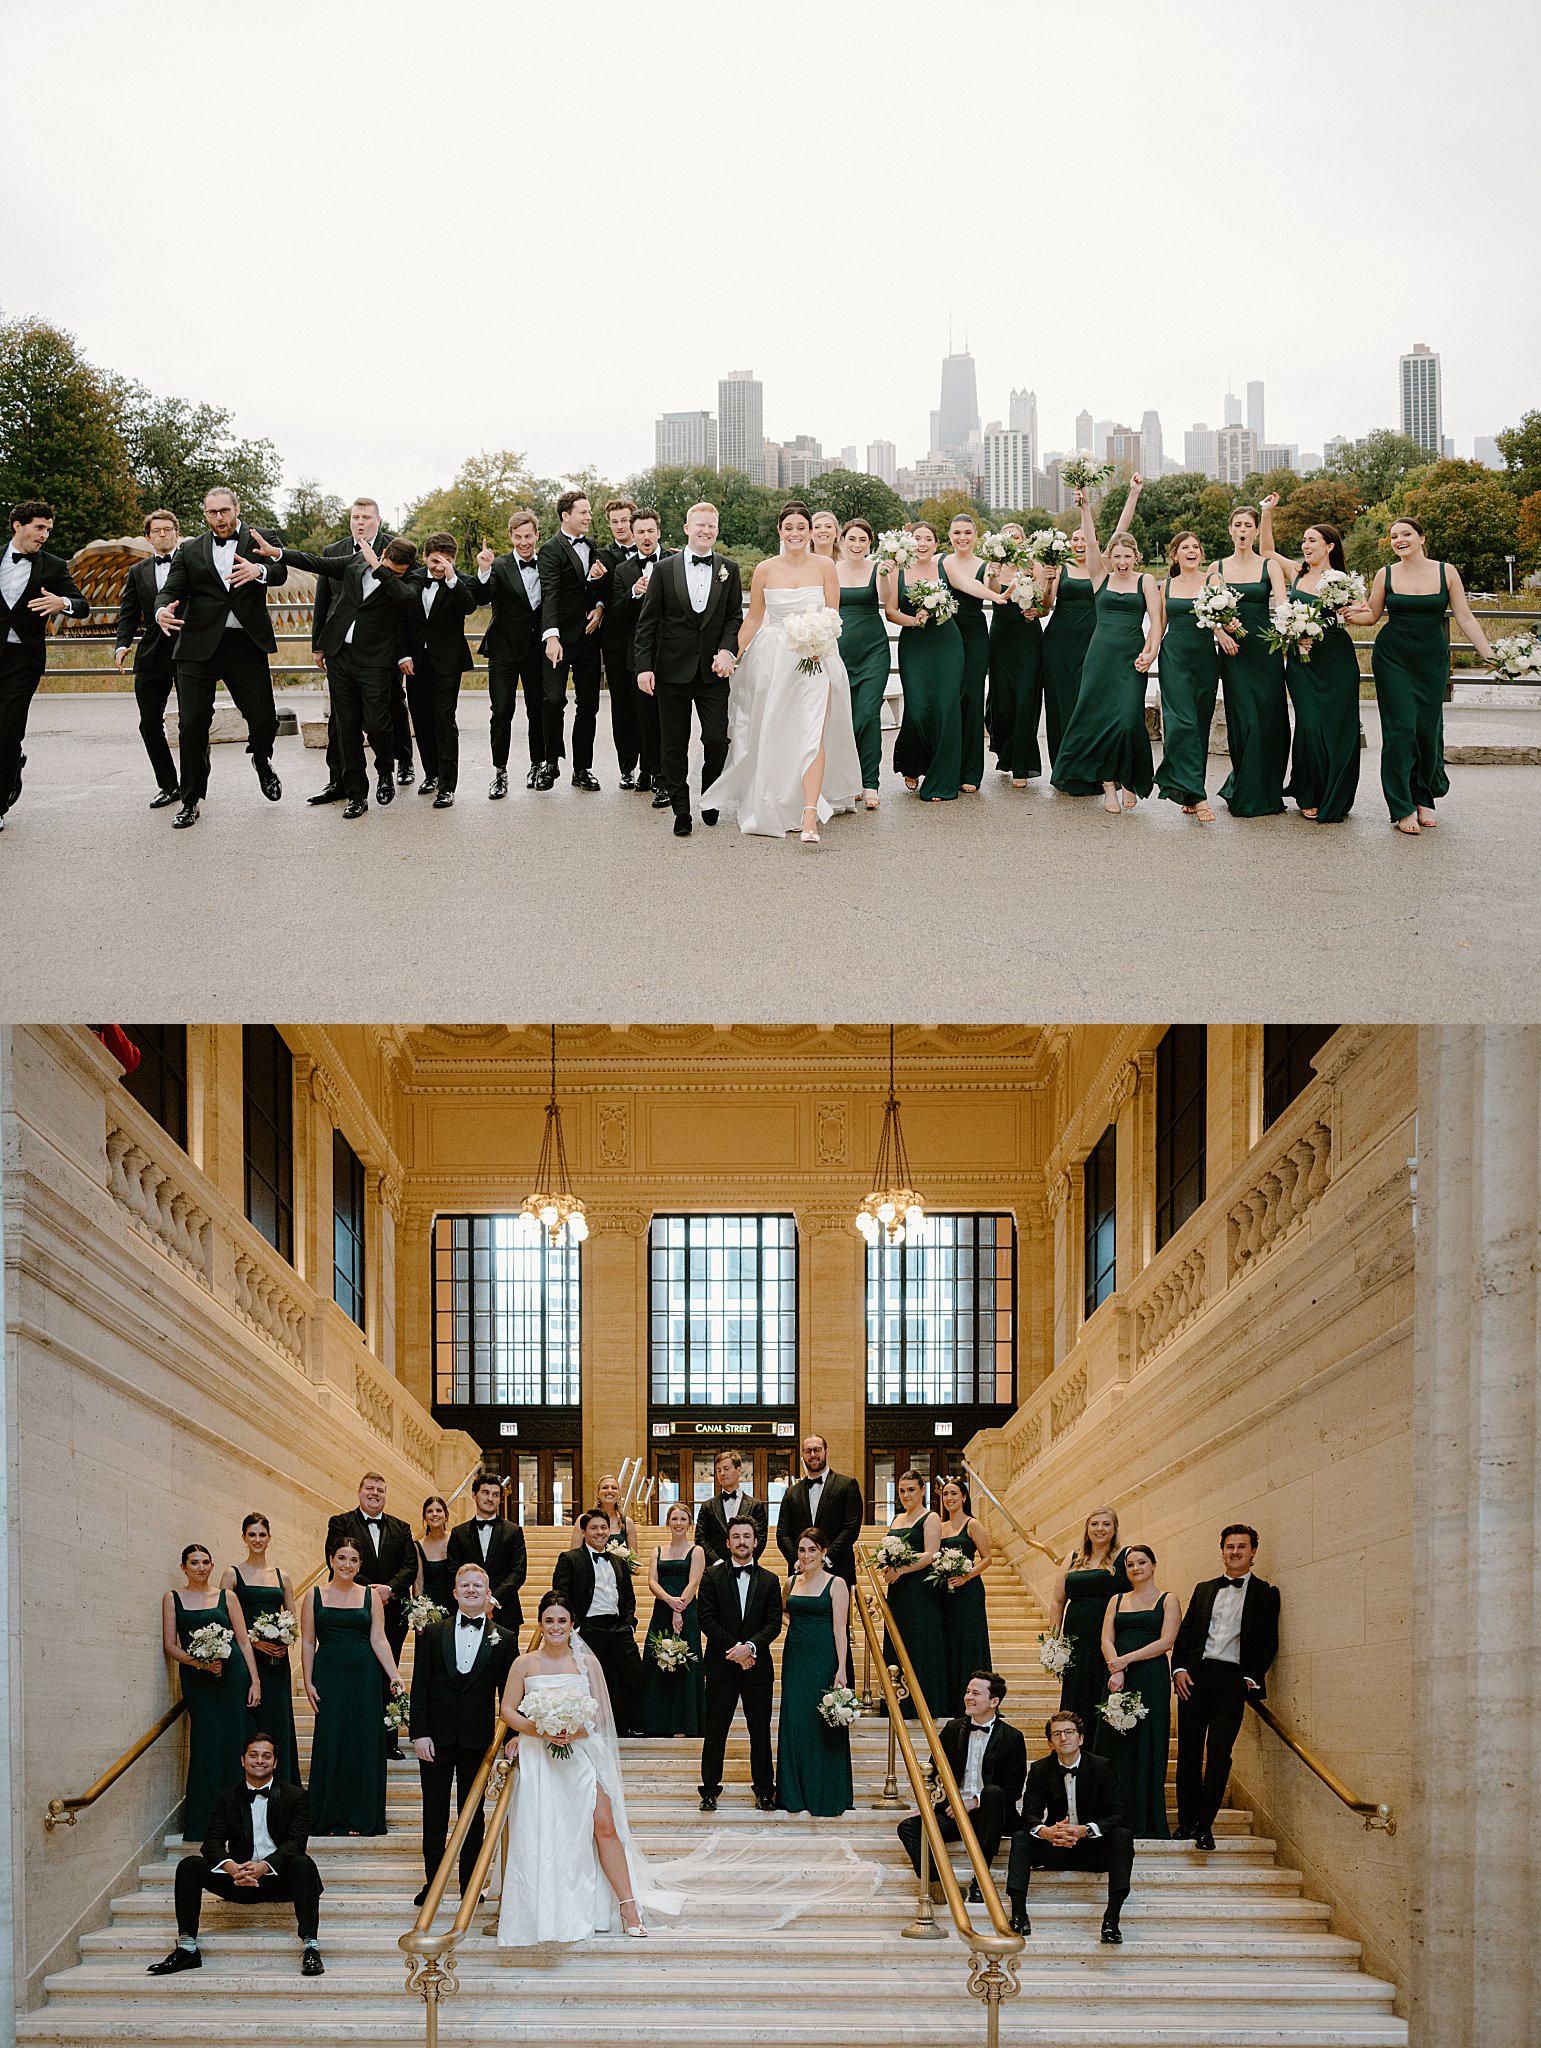 wedding party gathers on stairs in train station by Midwest wedding photographer